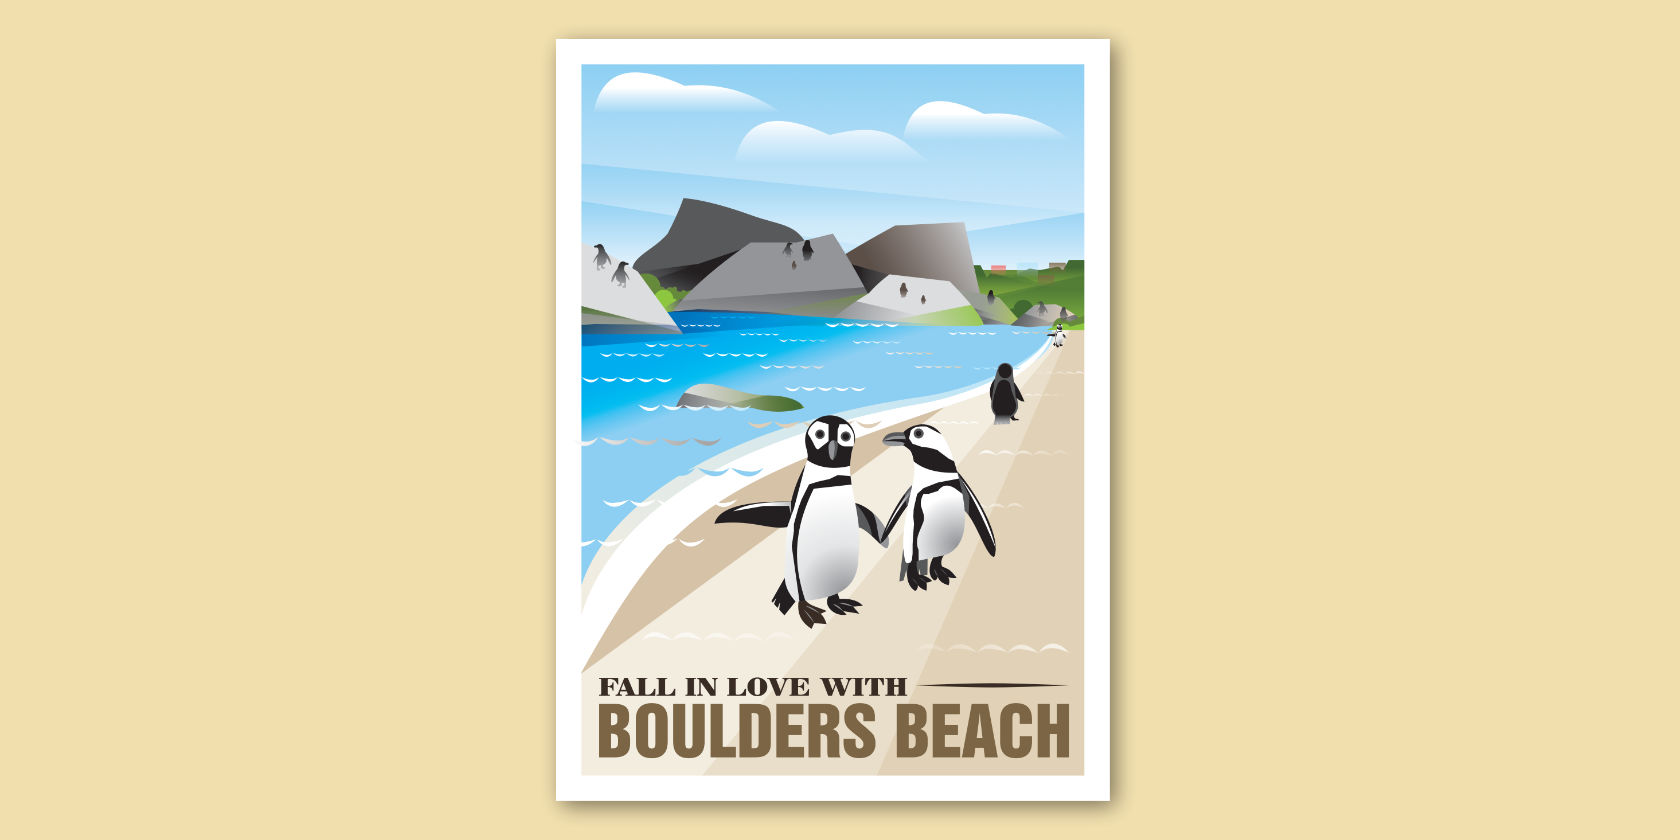 Poster Design - Boulders Beach Cape Town SOuth Africa